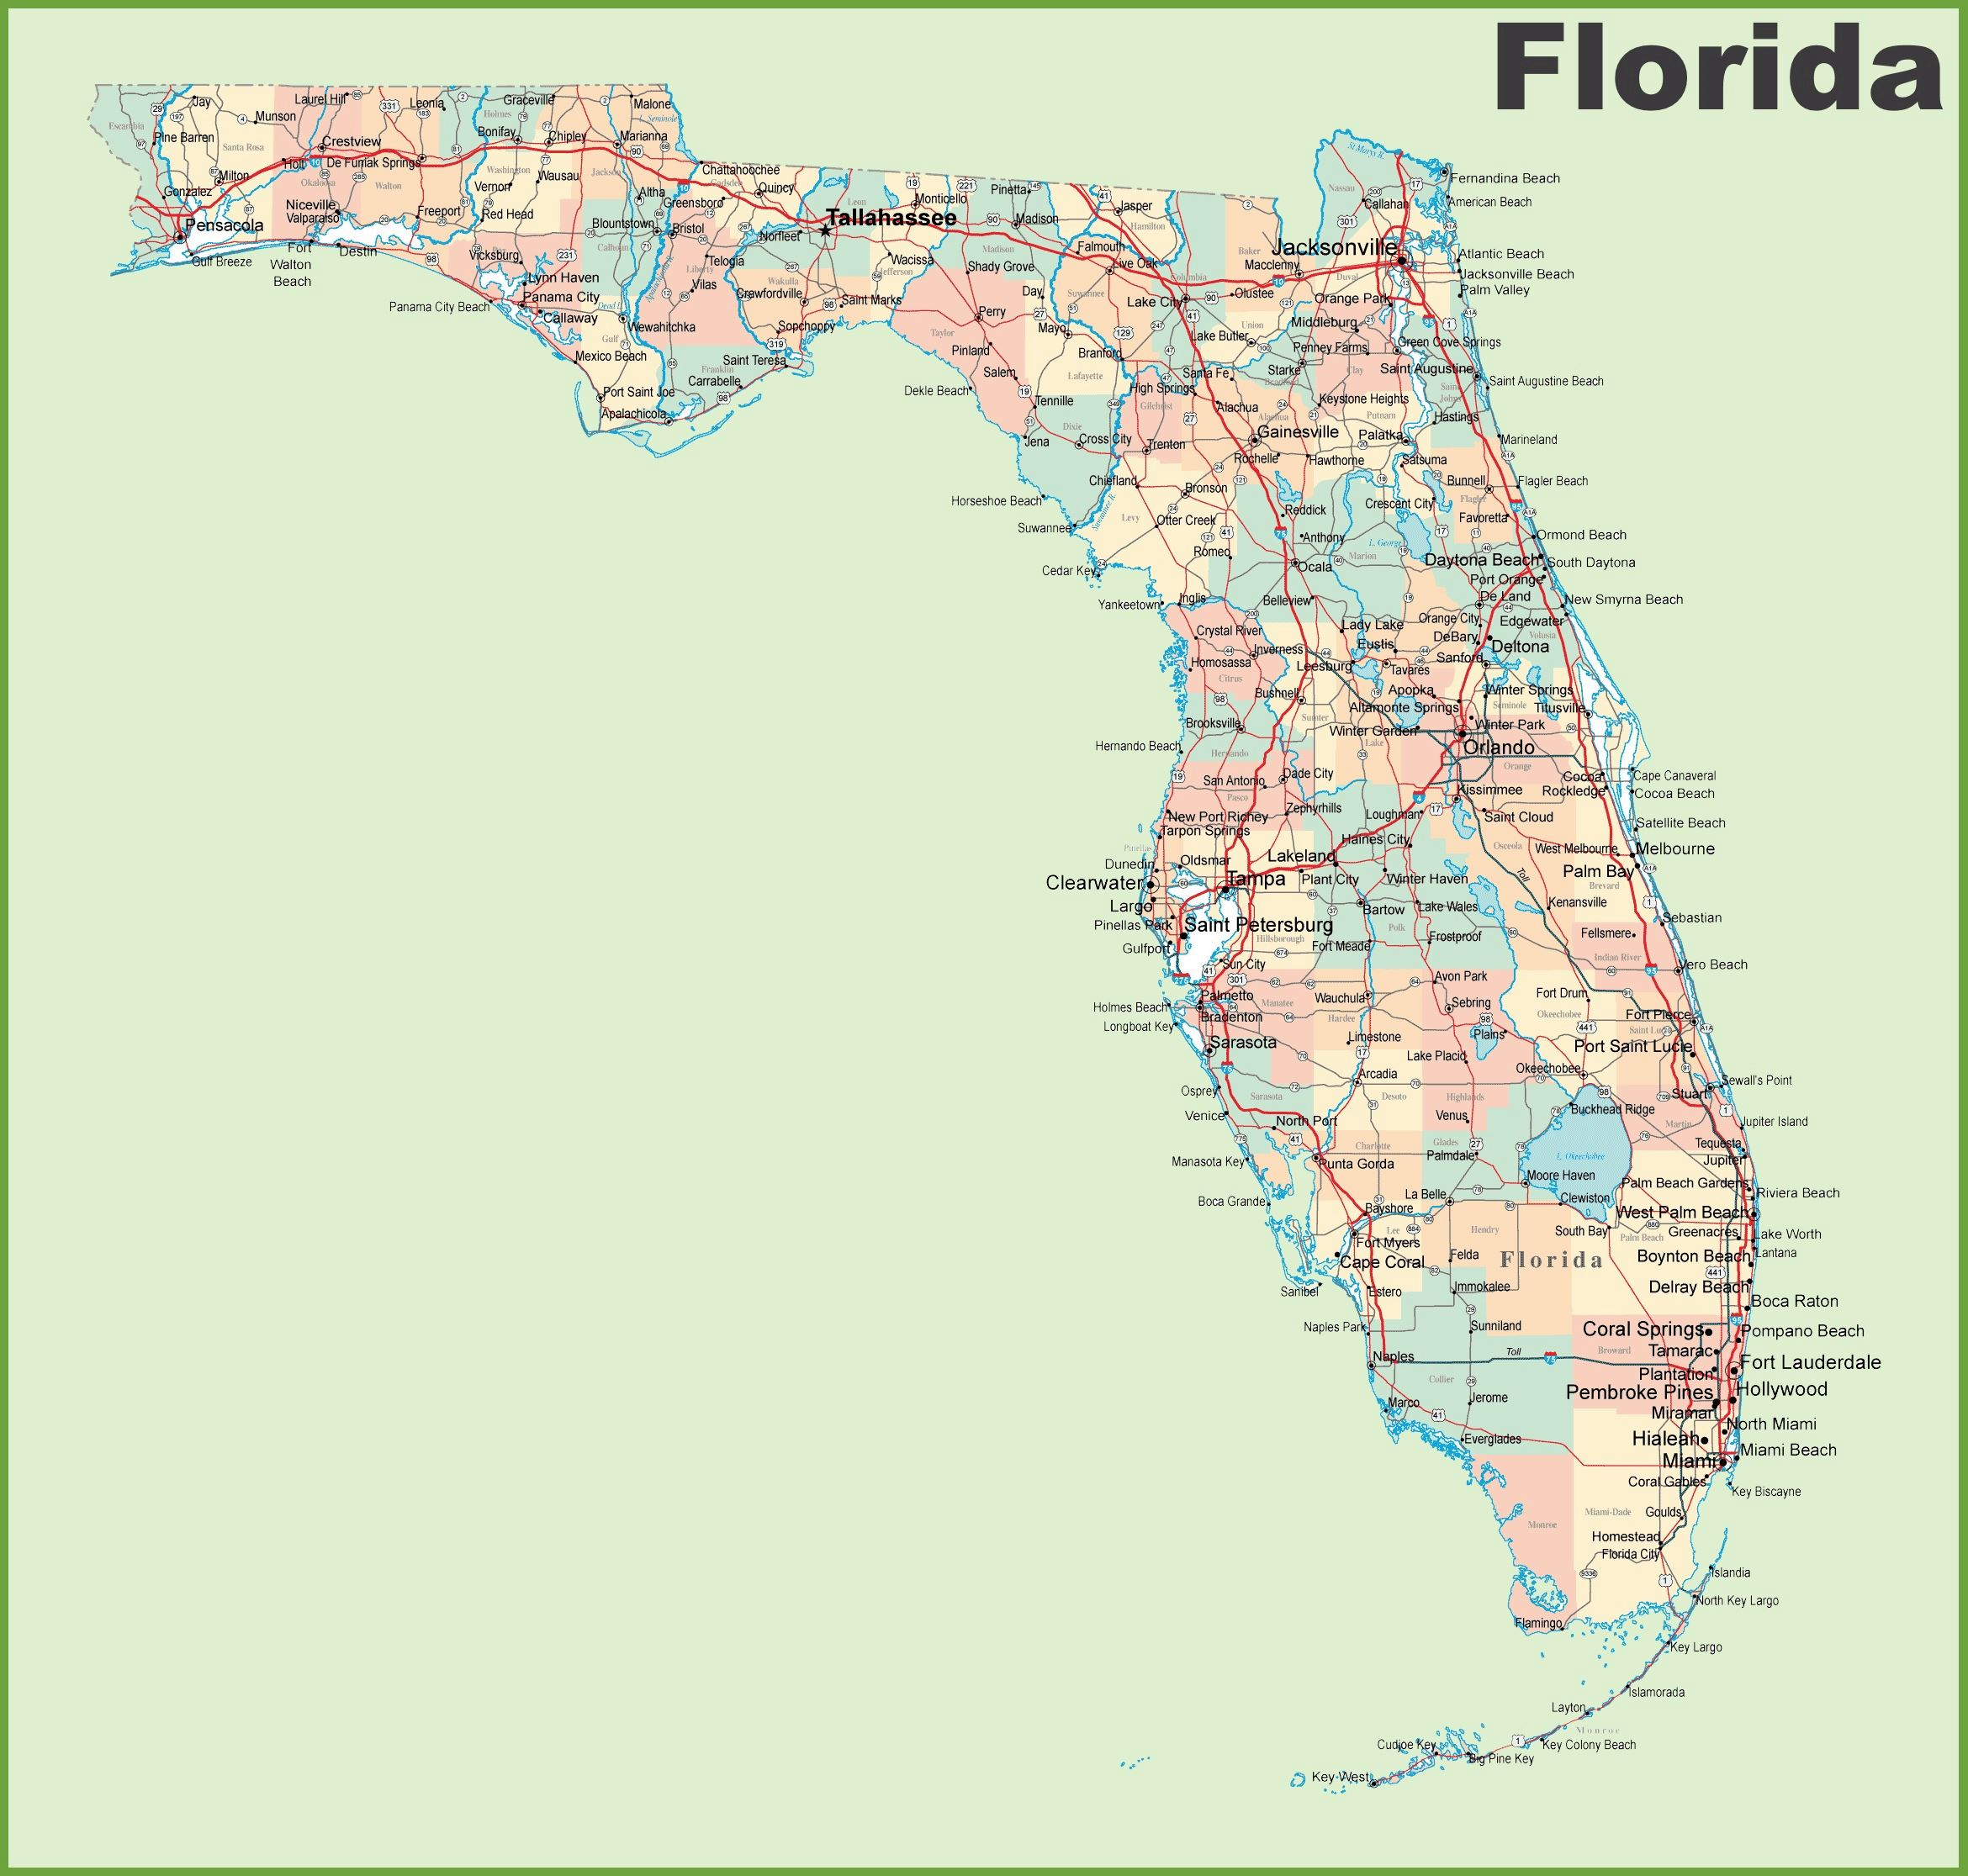 Large Florida Maps For Free Download And Print | High-Resolution And - Florida Traffic Map